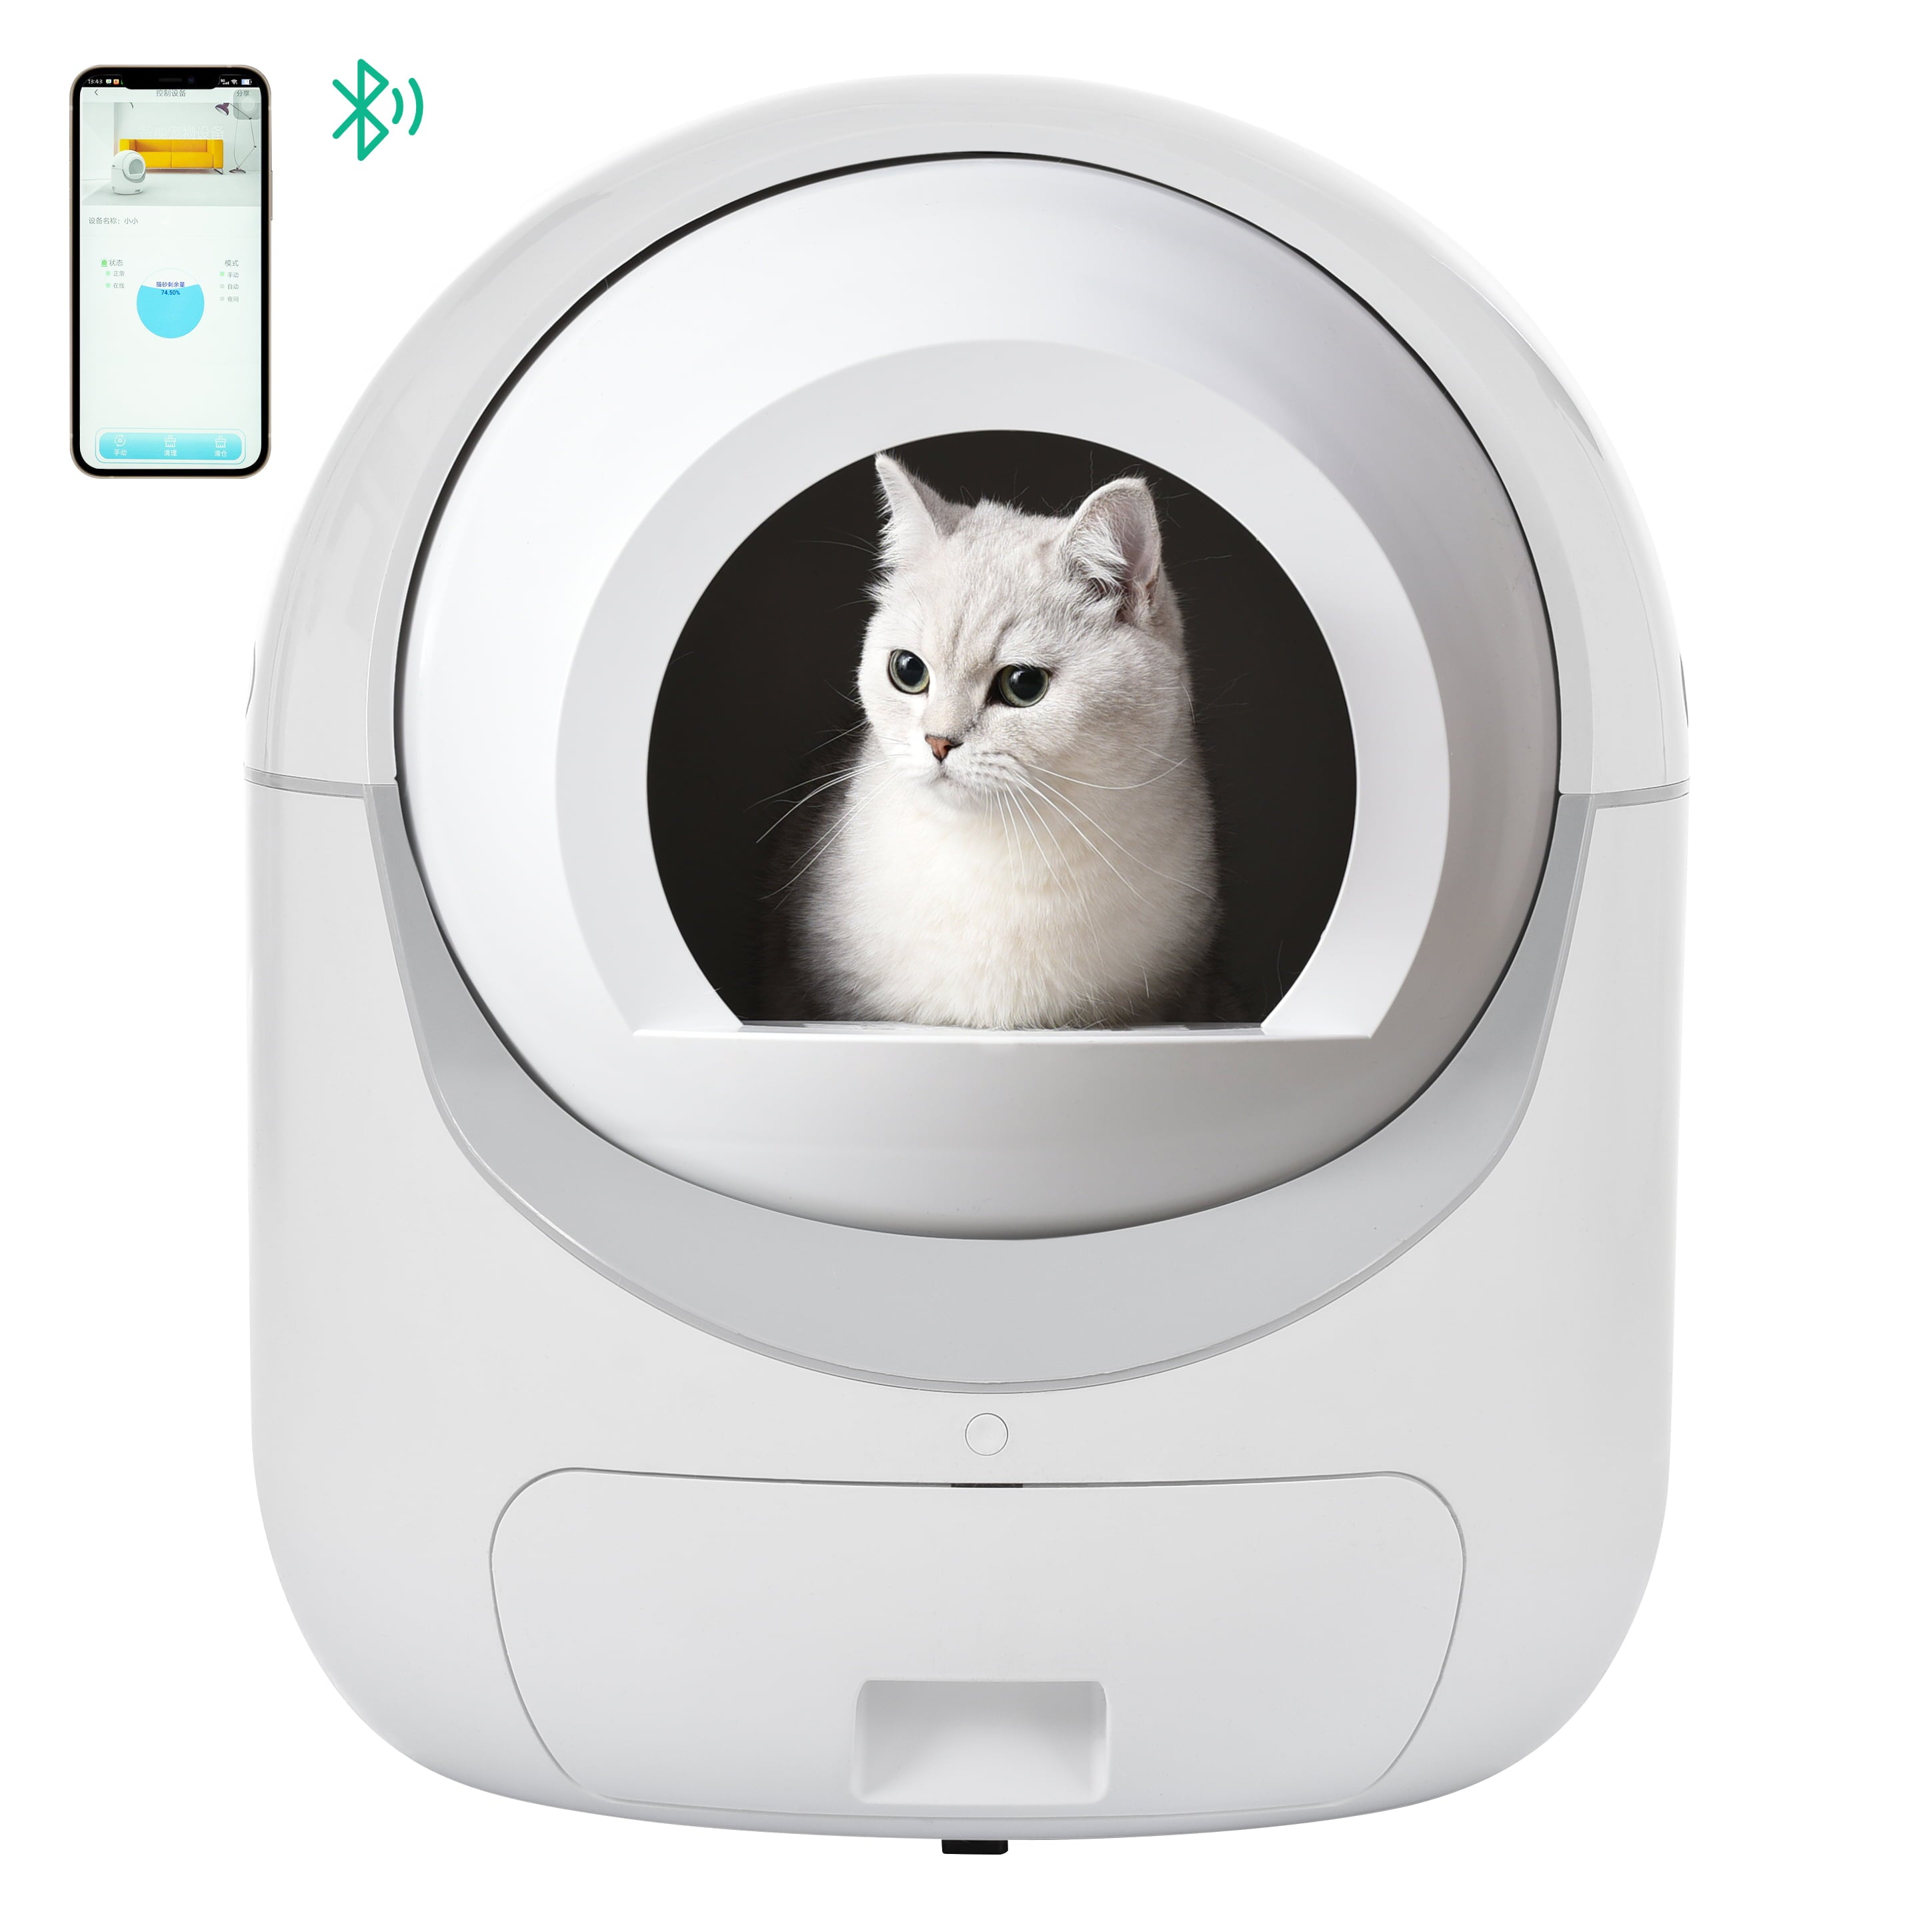 Self -Cleaning Cat Litter Box for Multiple Cats ， Scooping Automatically ， Suitable for all kinds of cat litter， Secure，Odor Removal ， App Control， Support 5Gand2.4G WiFi.